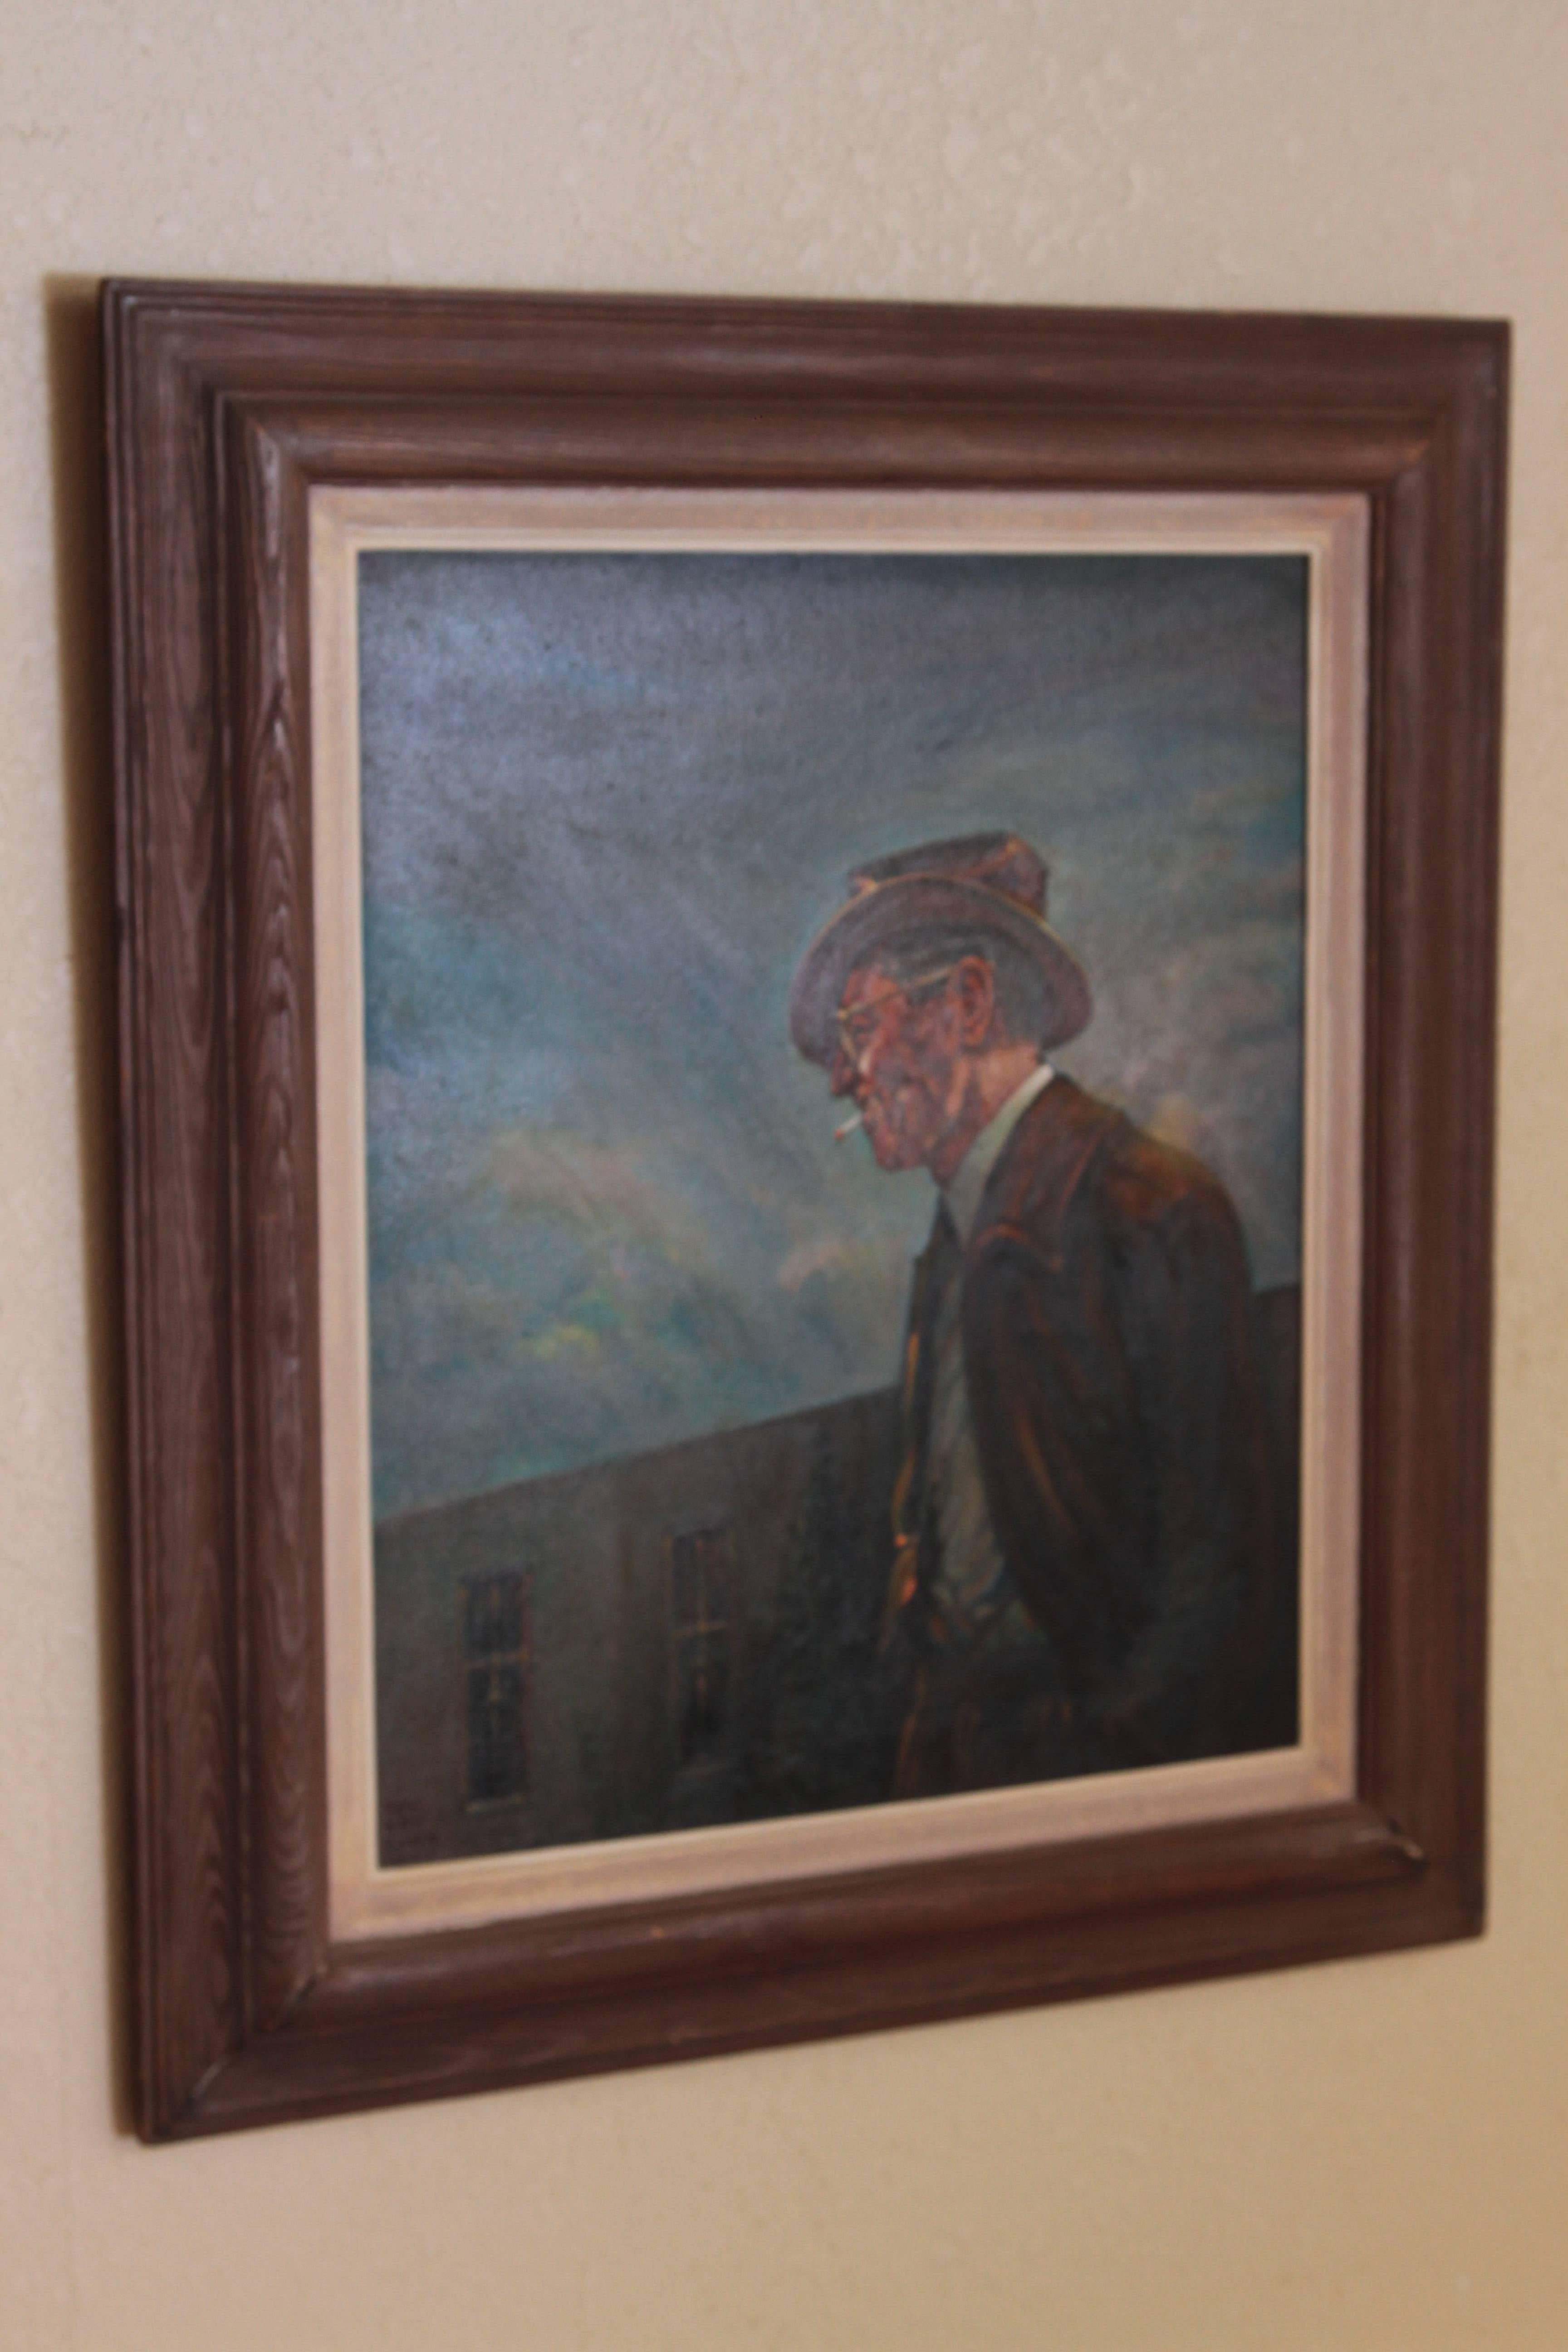 Midcentury oil on canvas portrait of Jerry Bywater’s Dallas Museum of Art by Tom Van Buren

Portrait of important Texas Regionalist Bywaters by his student Tom Van Buren, circa 1950s.
Bywaters, one of the noted 